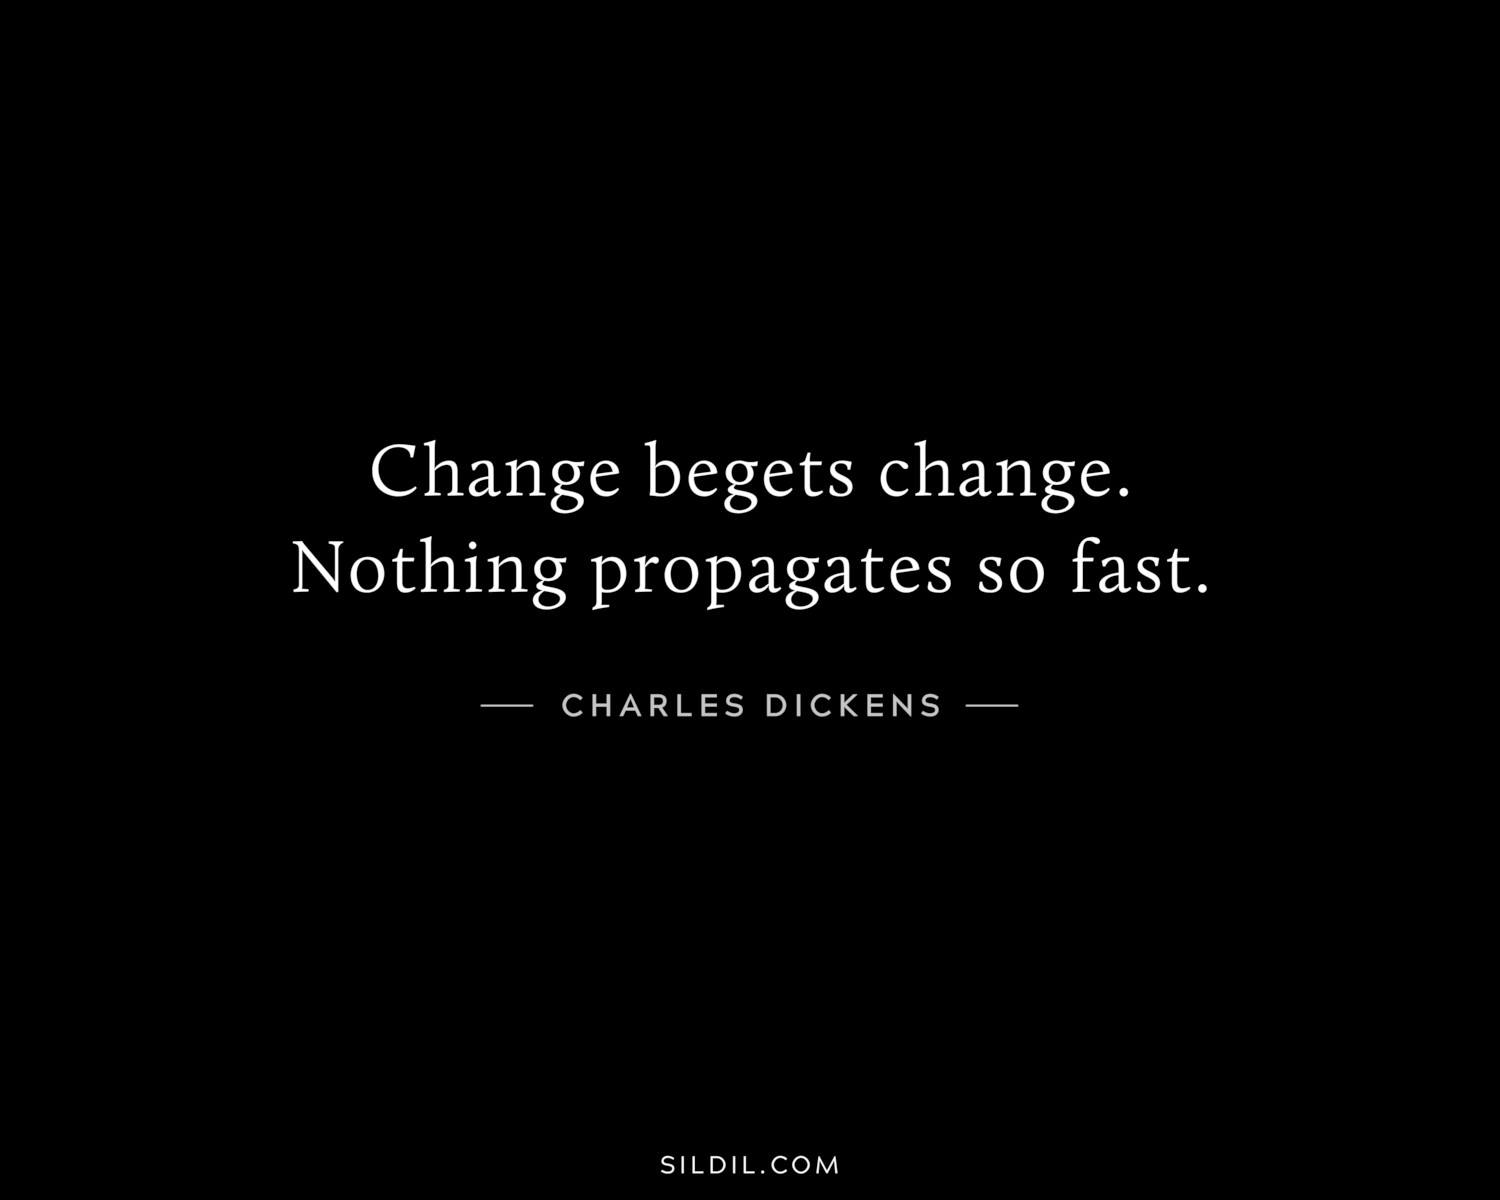 Change begets change. Nothing propagates so fast.